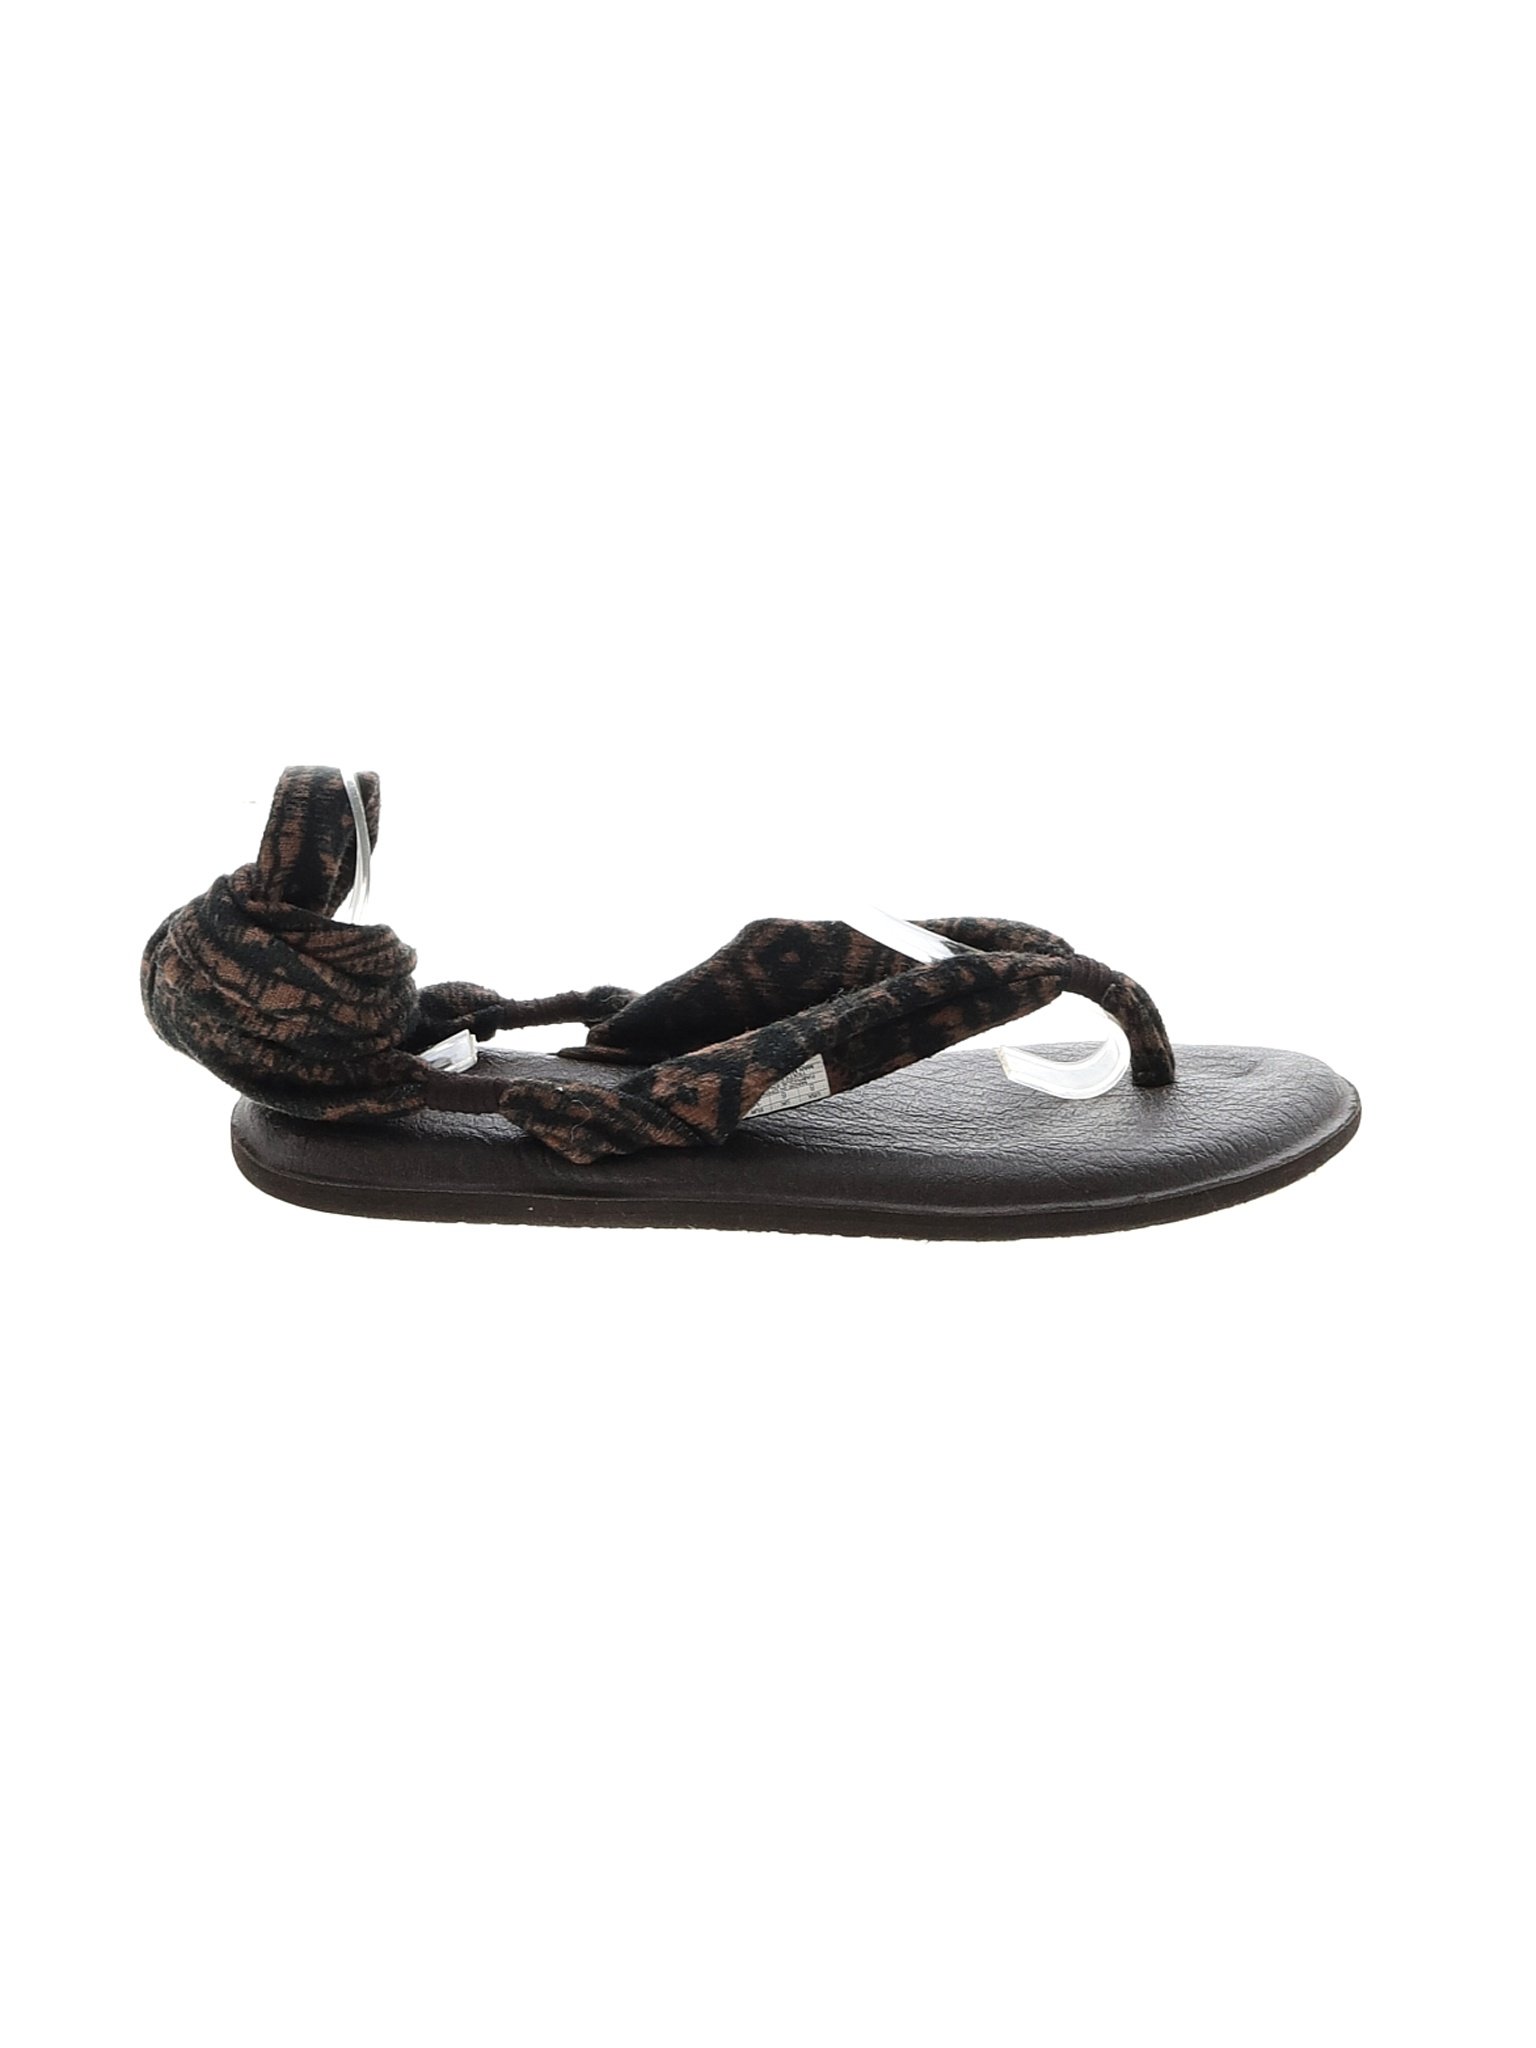 Buy Pre-Owned Sanuk Womens Size 8 Sandals at Ubuy Nigeria